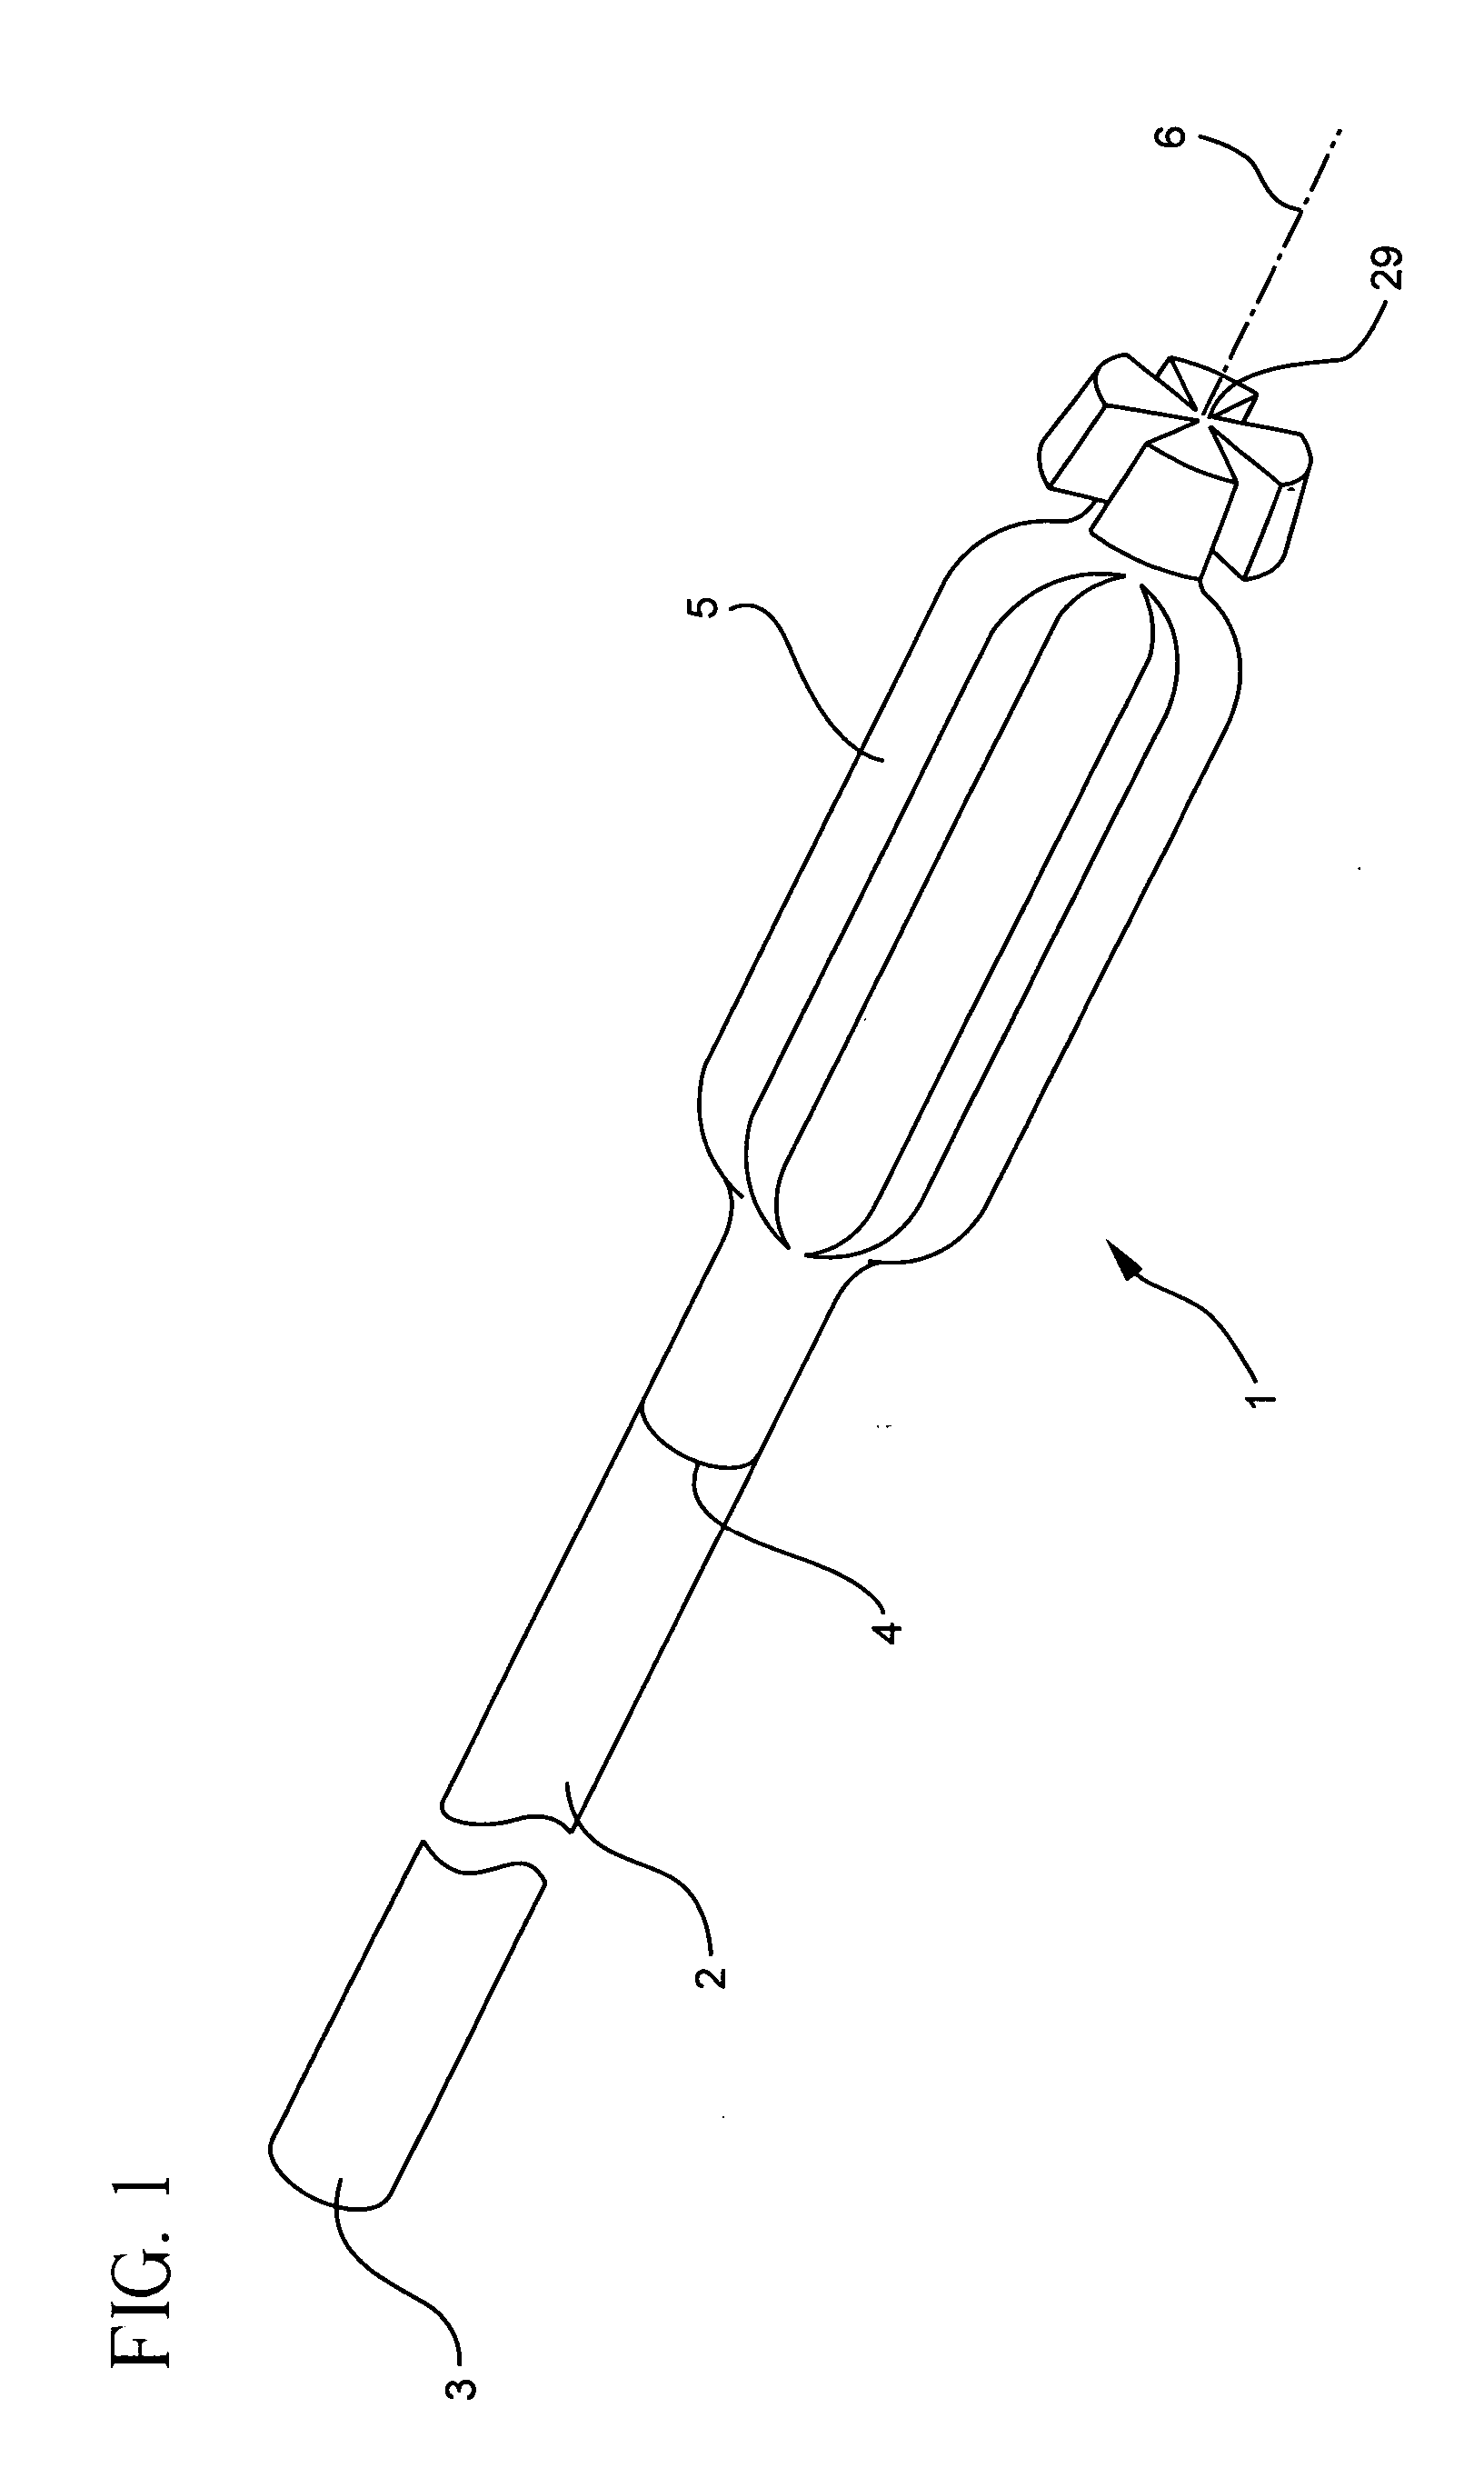 Apparatus and method for using a surgical instrument with an expandable sponge